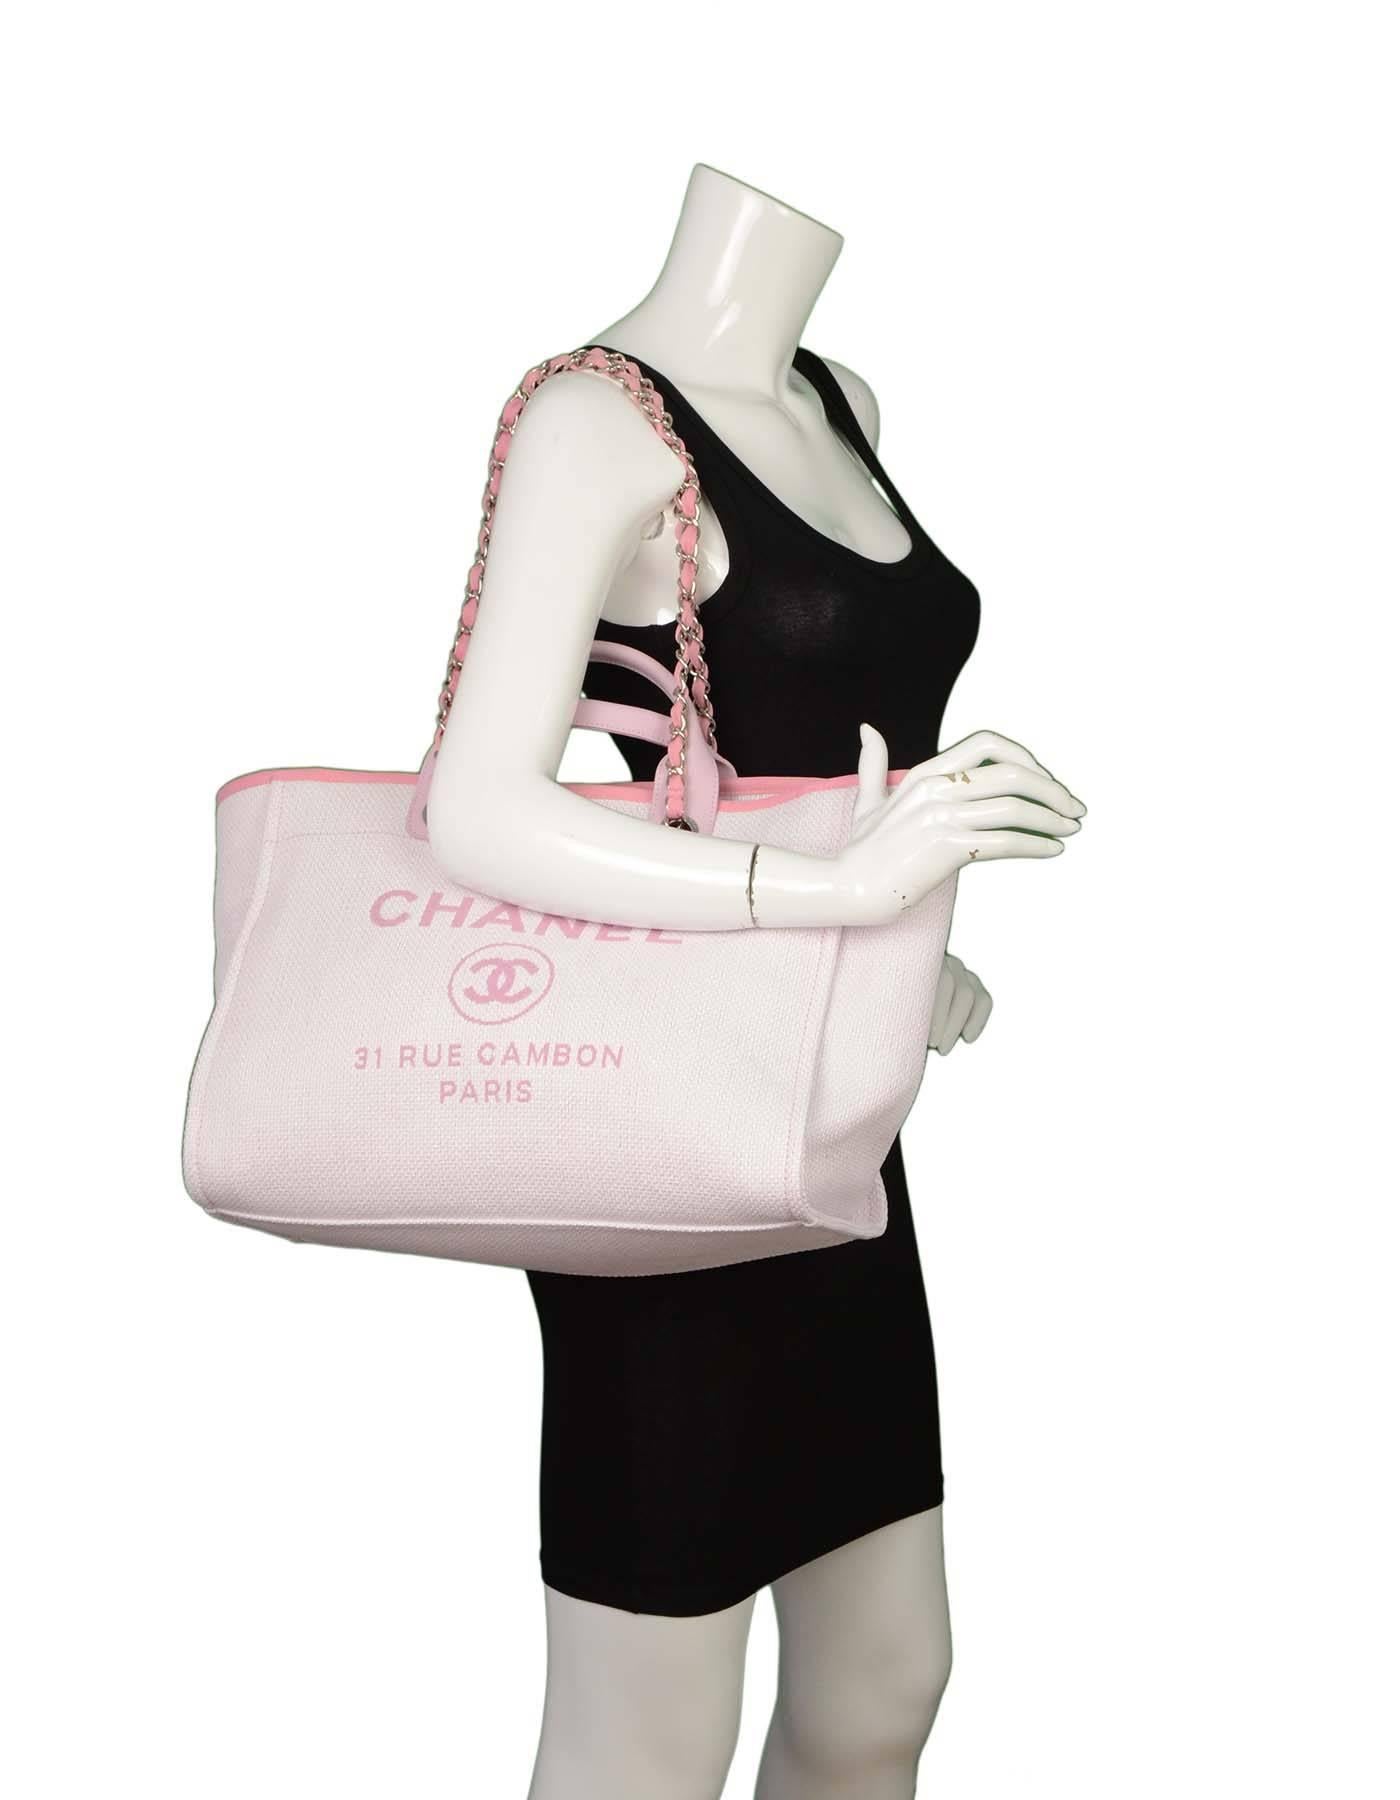 Chanel Pink Canvas Deauville Tote Bag SHW 3